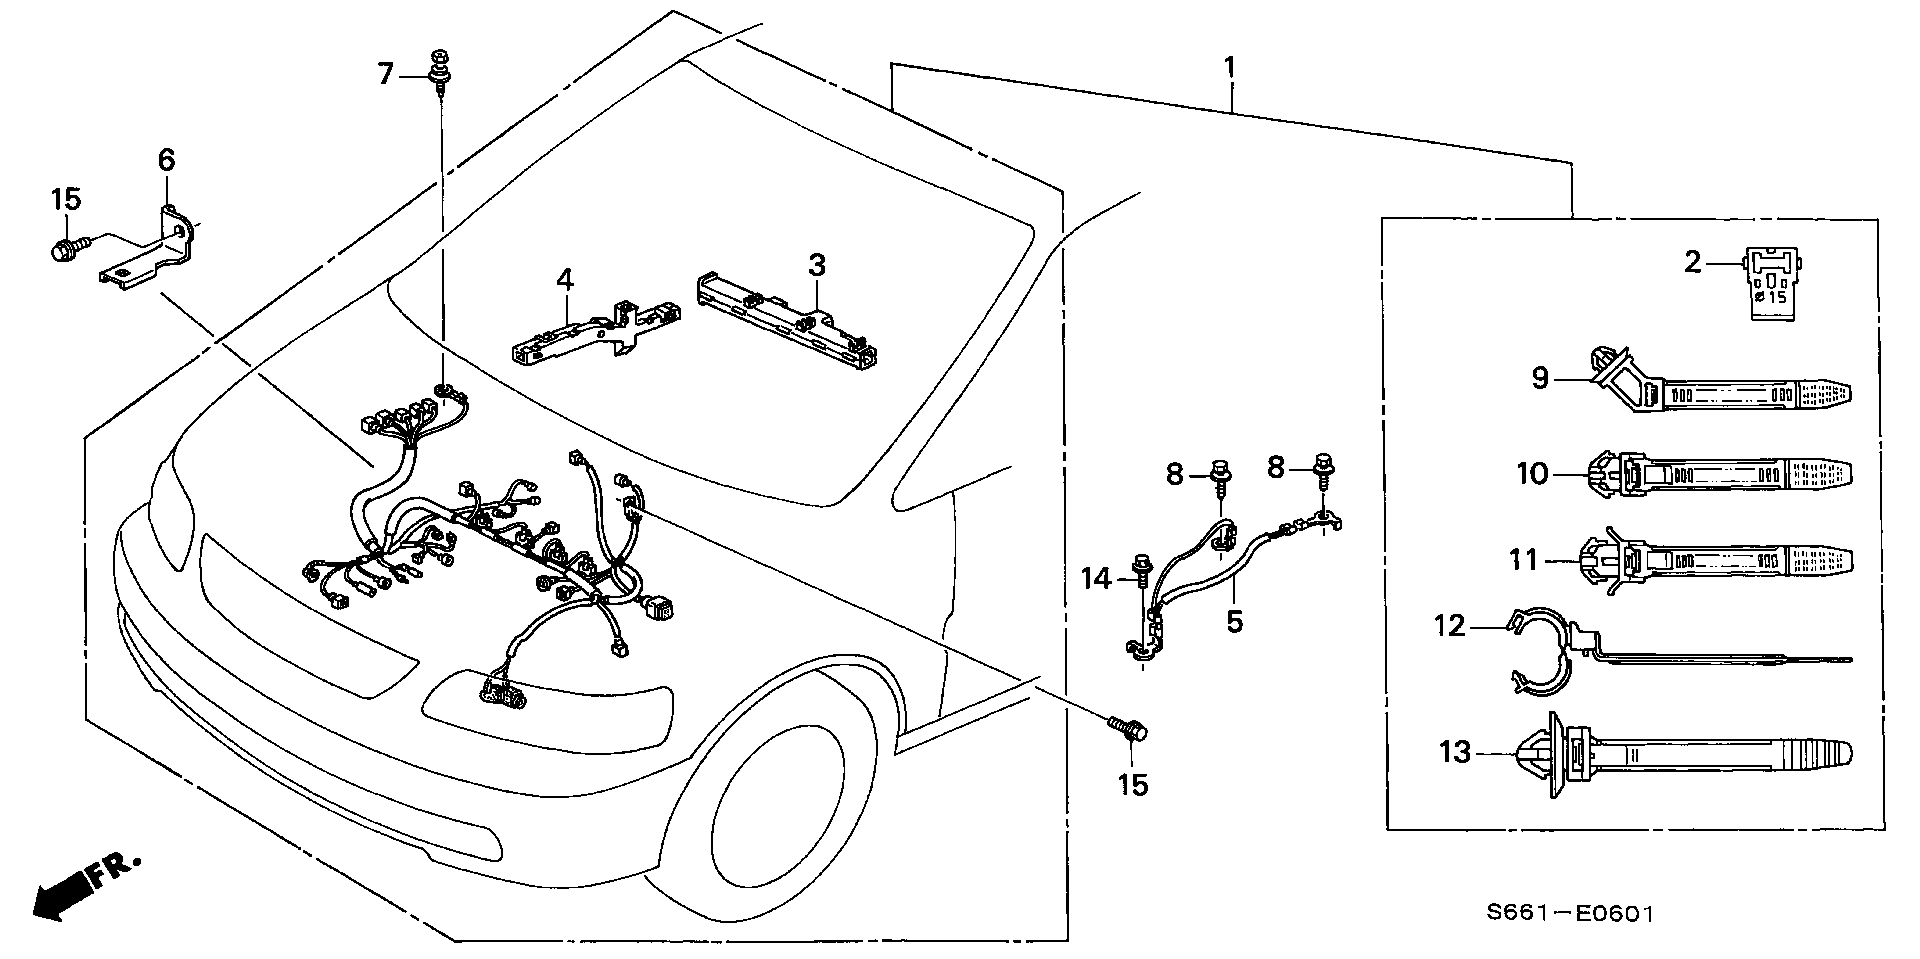 ENGINE WIRE HARNESS(2.3L)